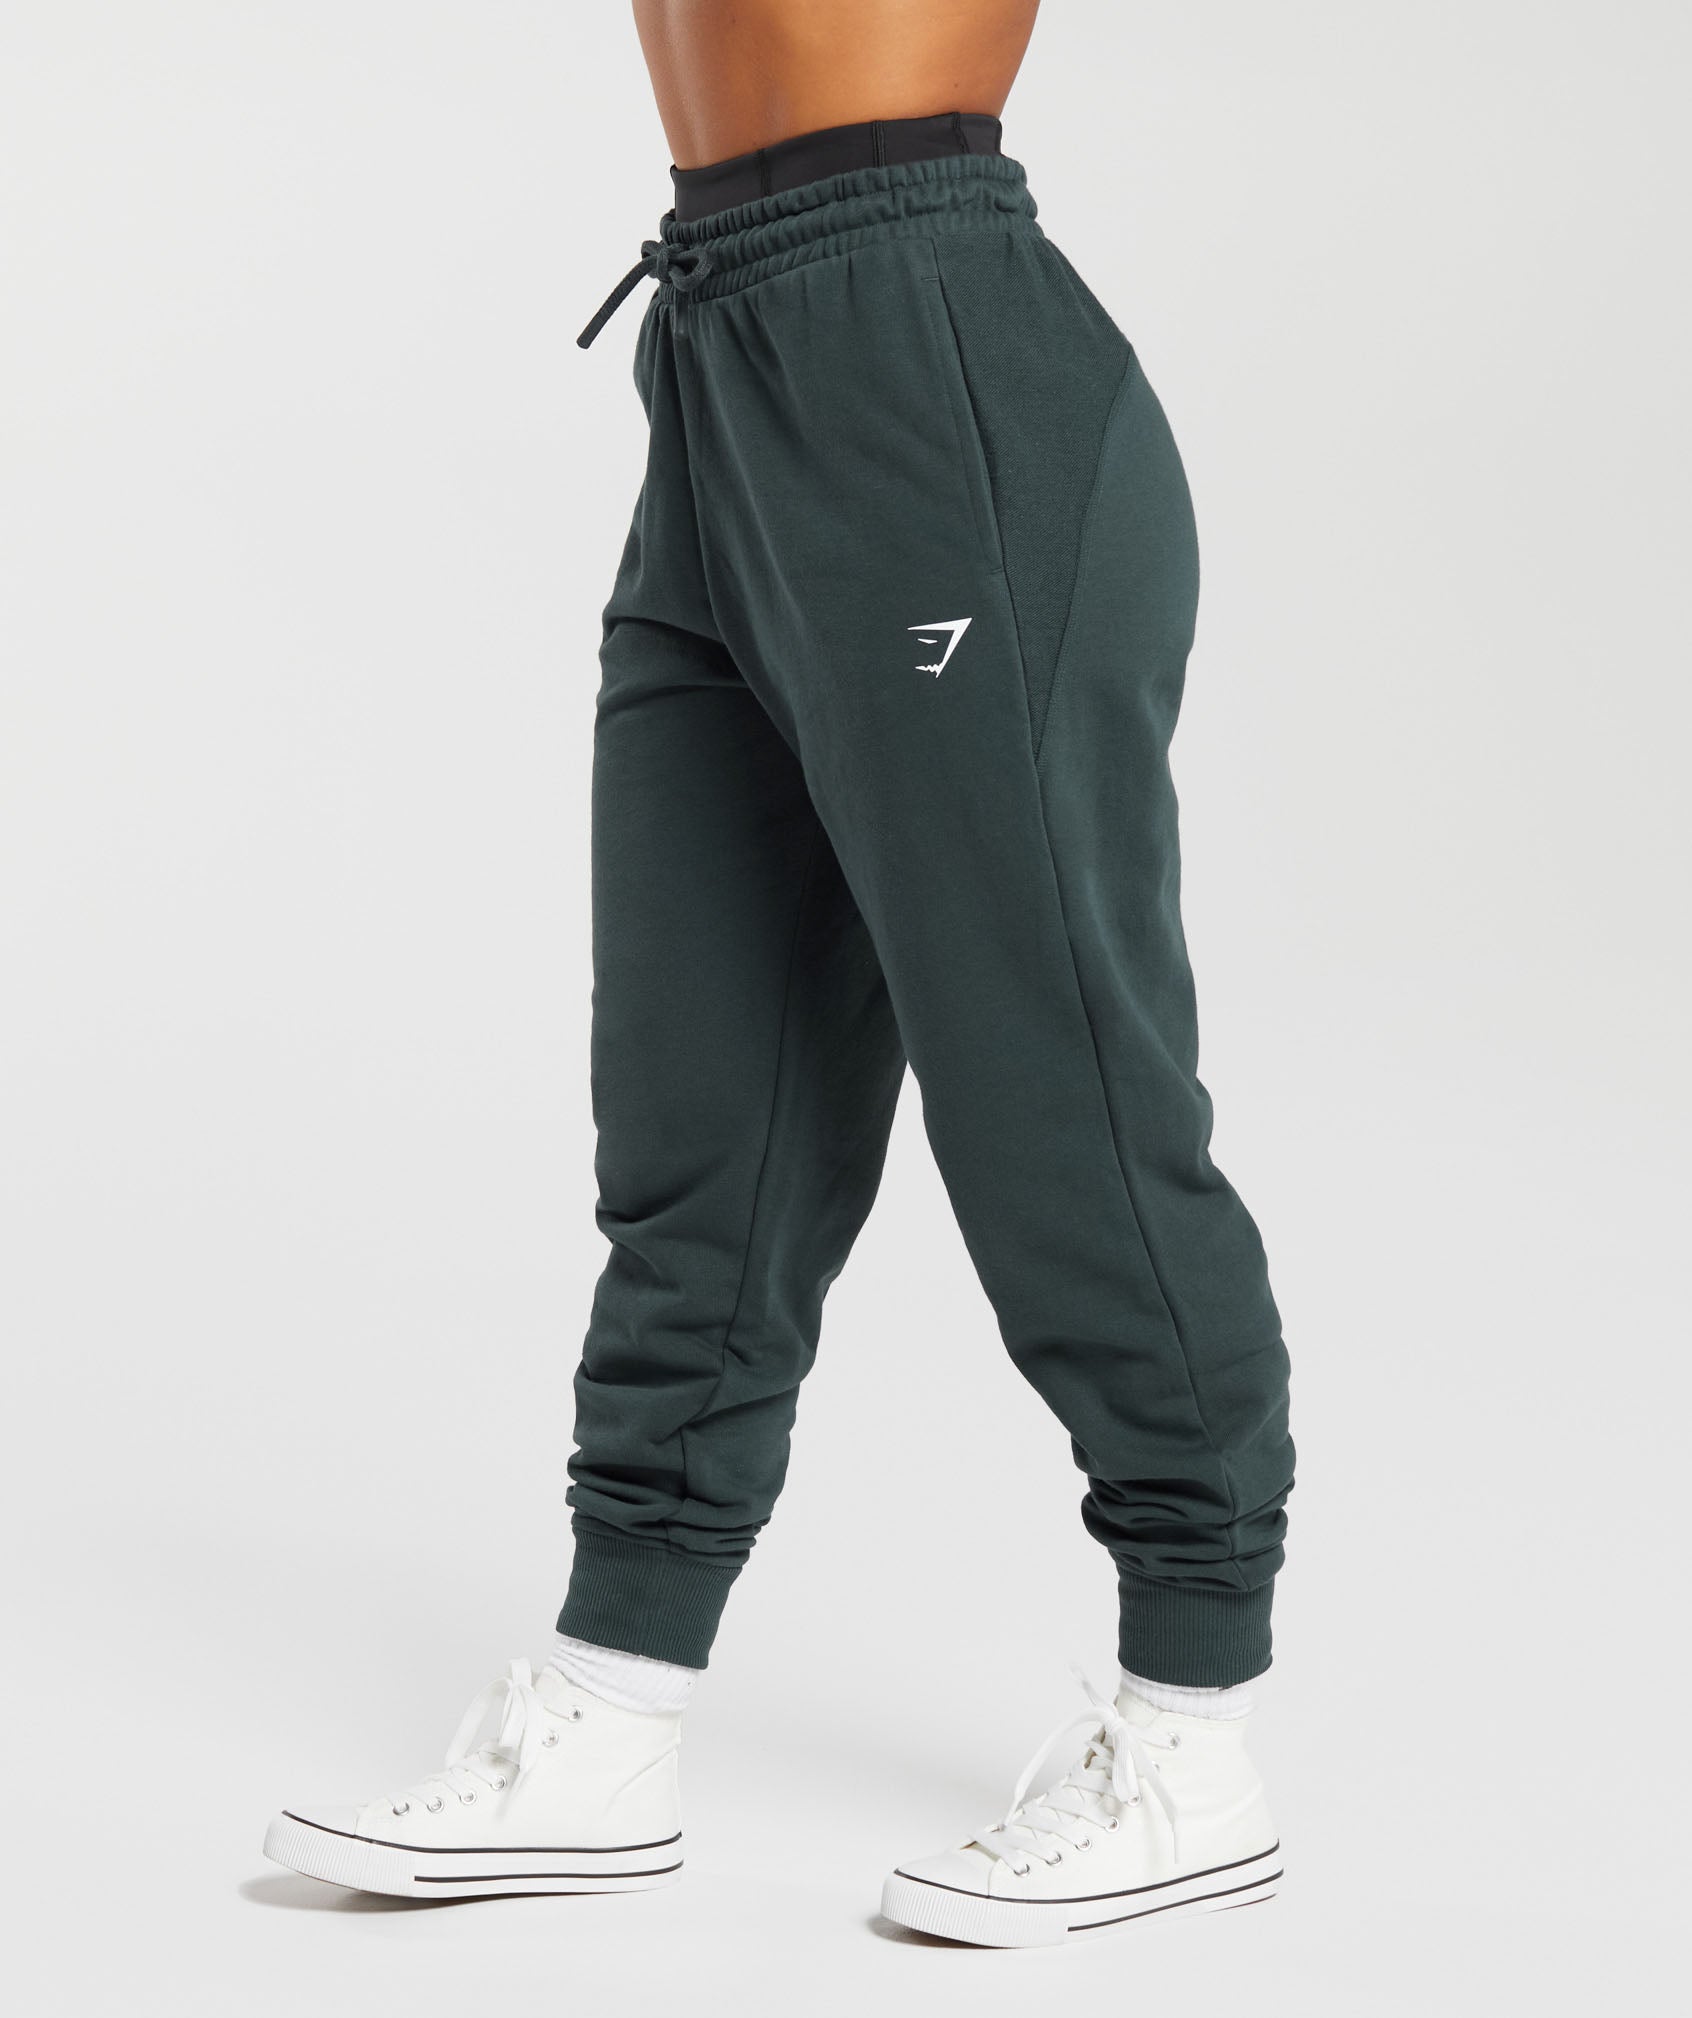 GS Power Joggers in Teal - view 3